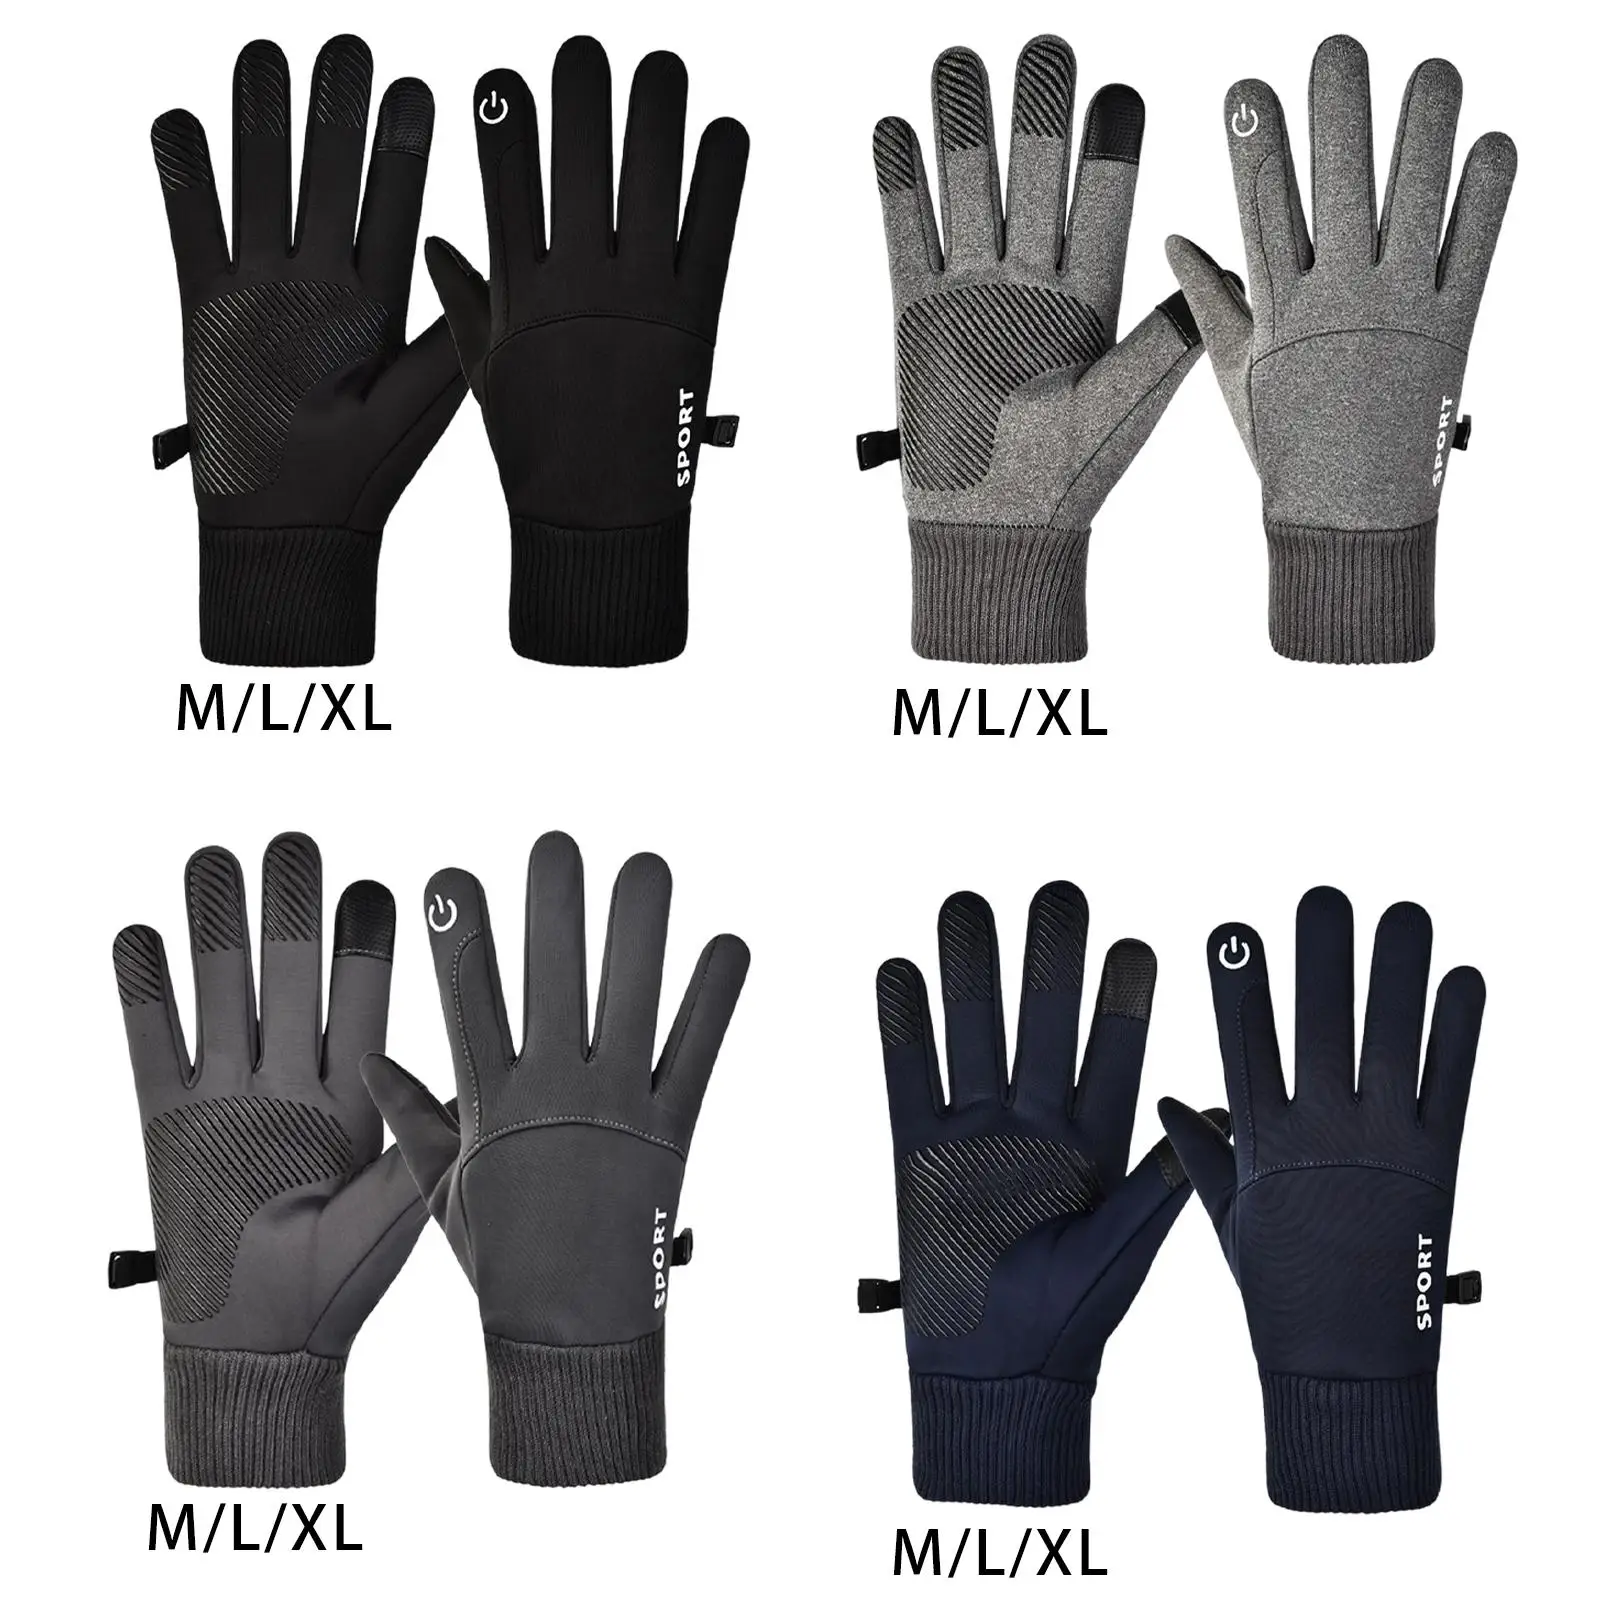 Warm Gloves Durable Weather Resistant Fashion Non Slip Comfortable Cycling Gloves for Outdoor Driving Cycling Hiking